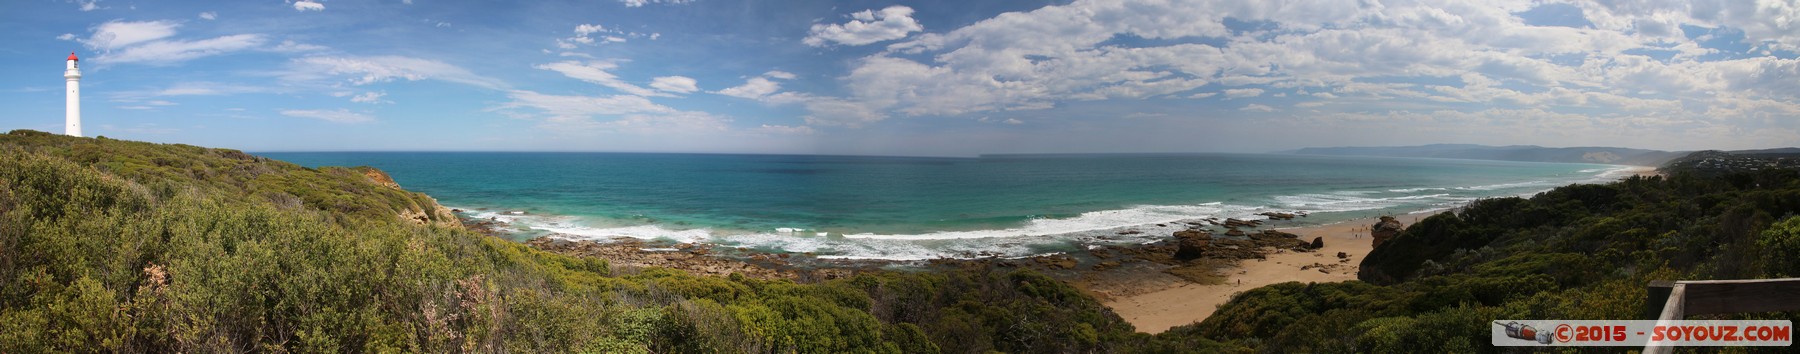 Great Ocean Road - Aireys Inlet - Panorama
Stitched Panorama
Mots-clés: Aireys Inlet AUS Australie geo:lat=-38.46822585 geo:lon=144.10247052 geotagged Victoria panorama plage